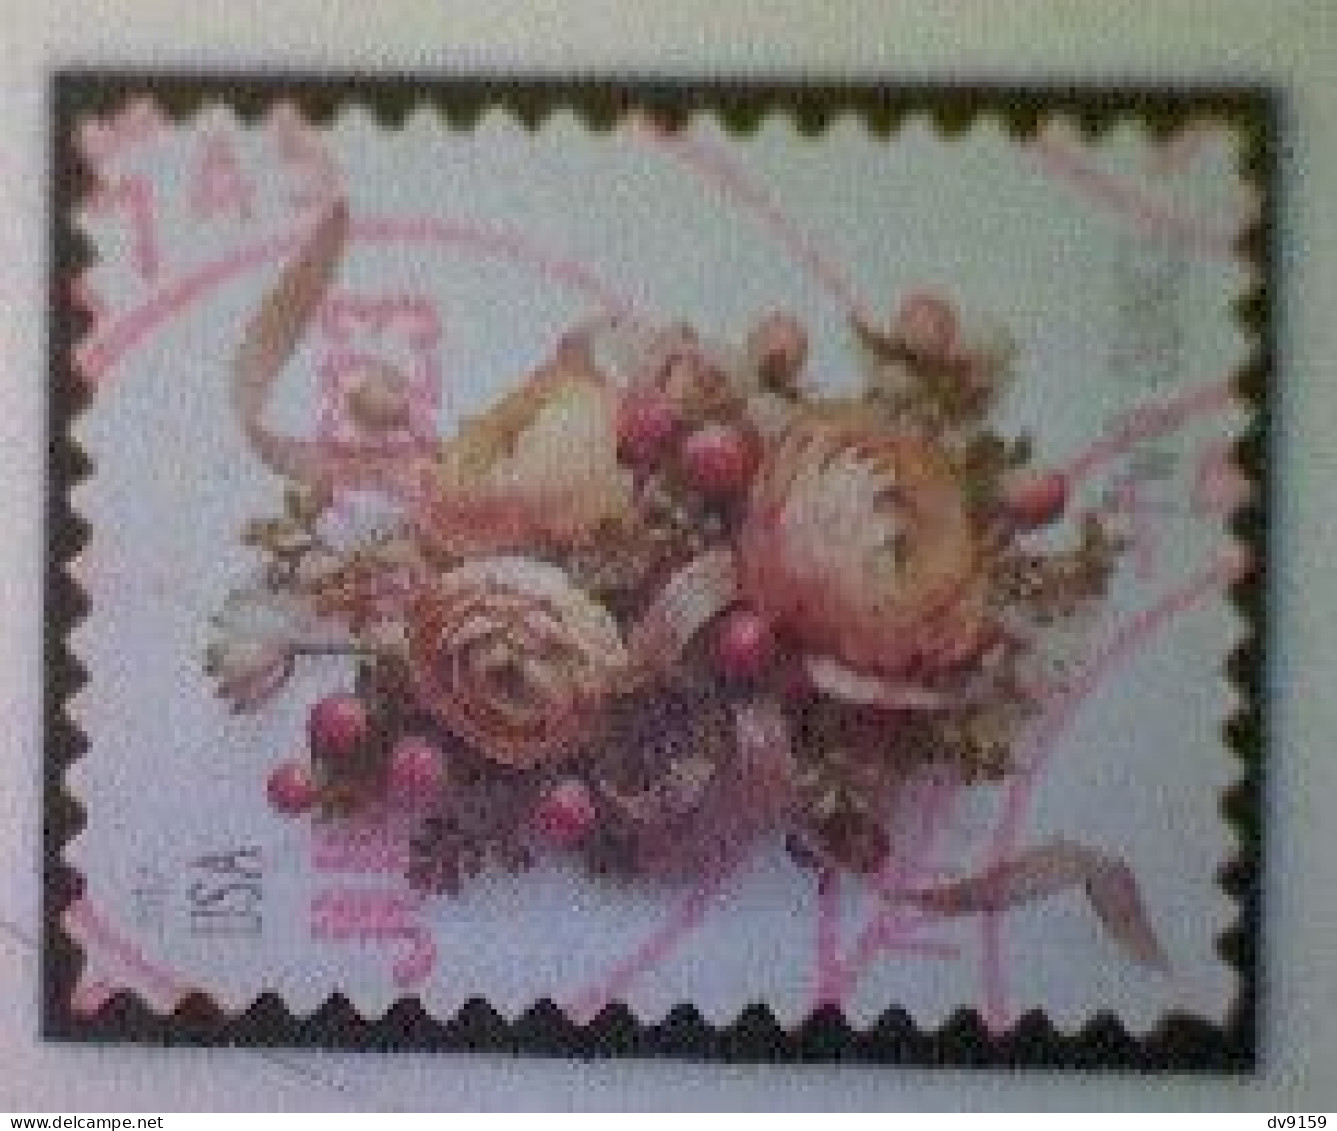 United States, Scott #5200, Used(o), 2017, Floral Corsage, (70¢), Multicolored - Gebruikt